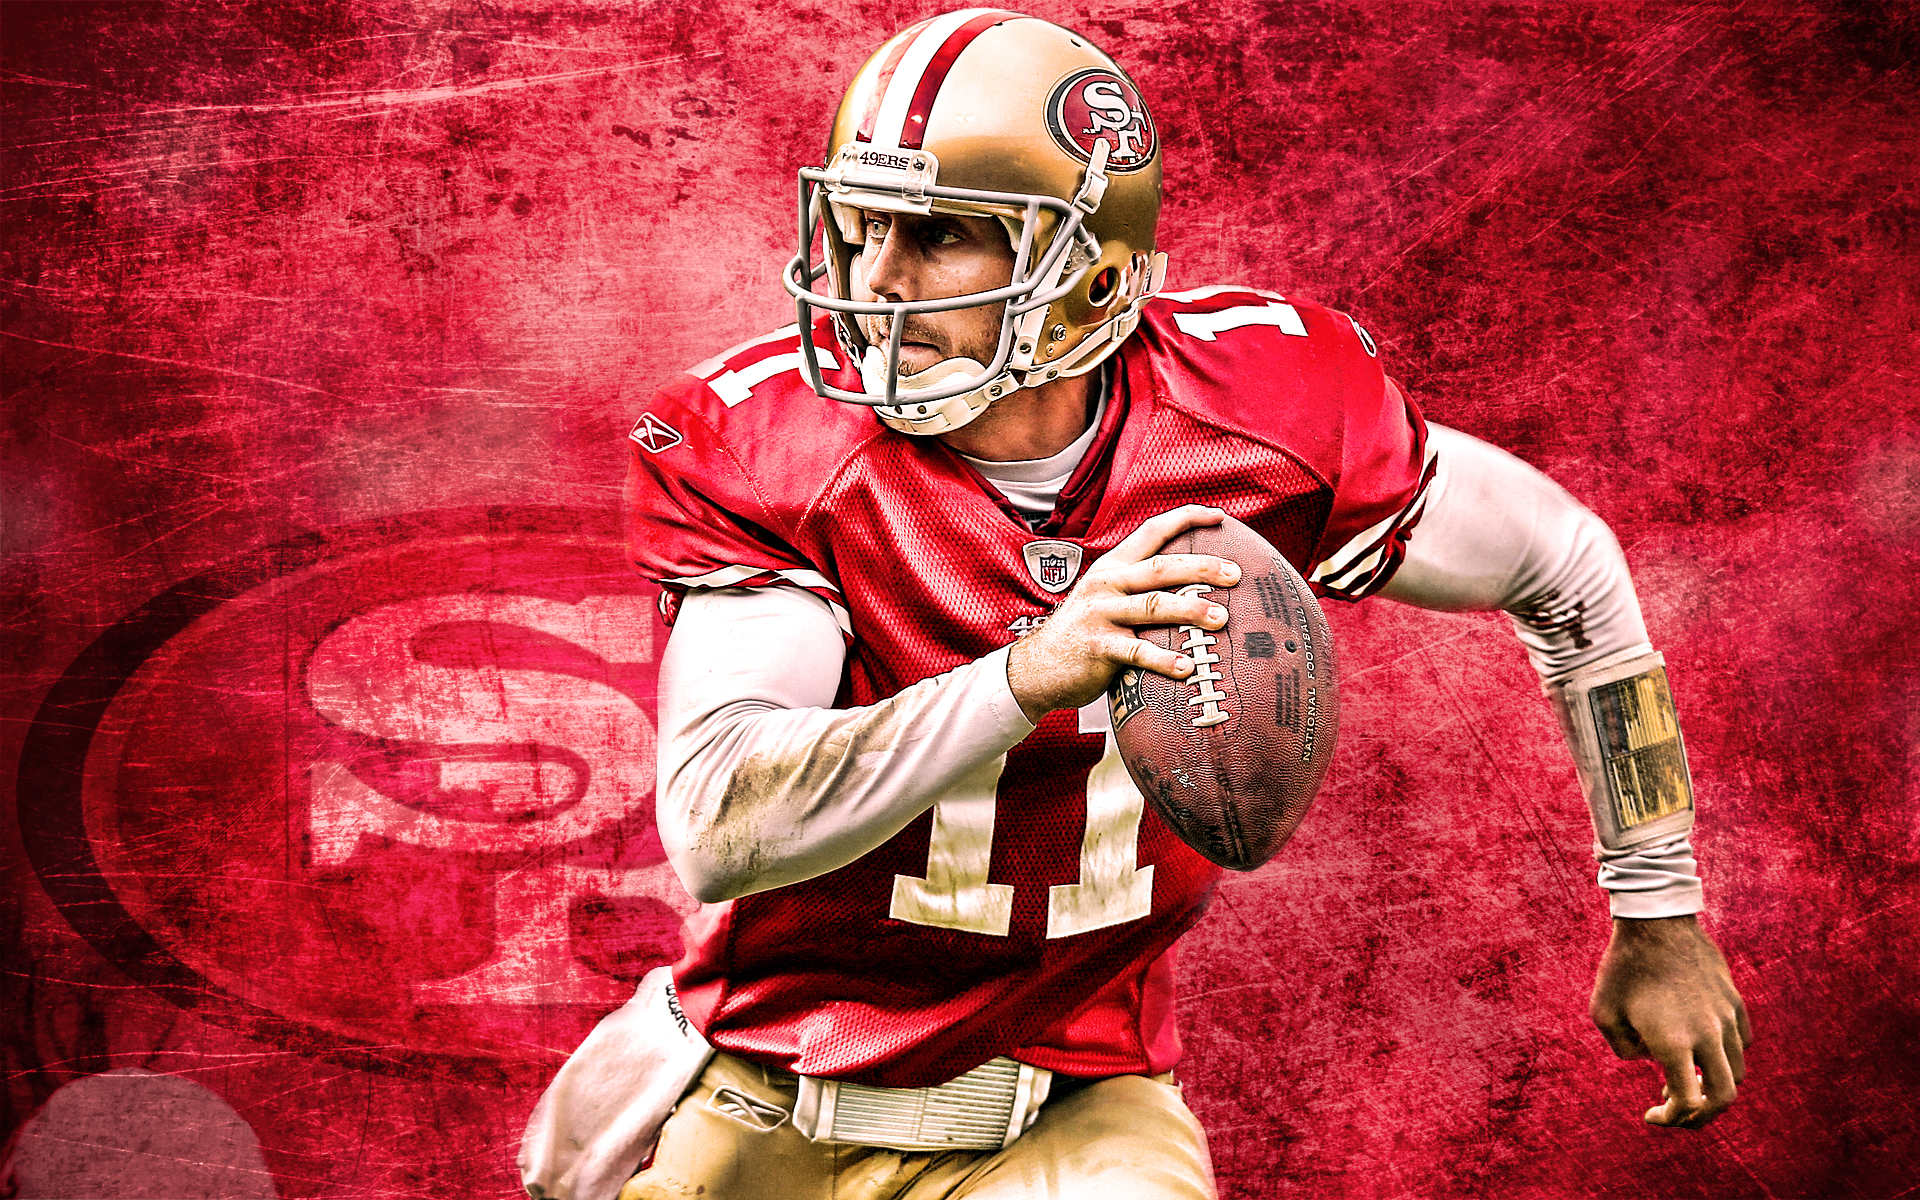 49er radio 49ers wallpapers 49ers images 49ers hd wallpapers 49ers